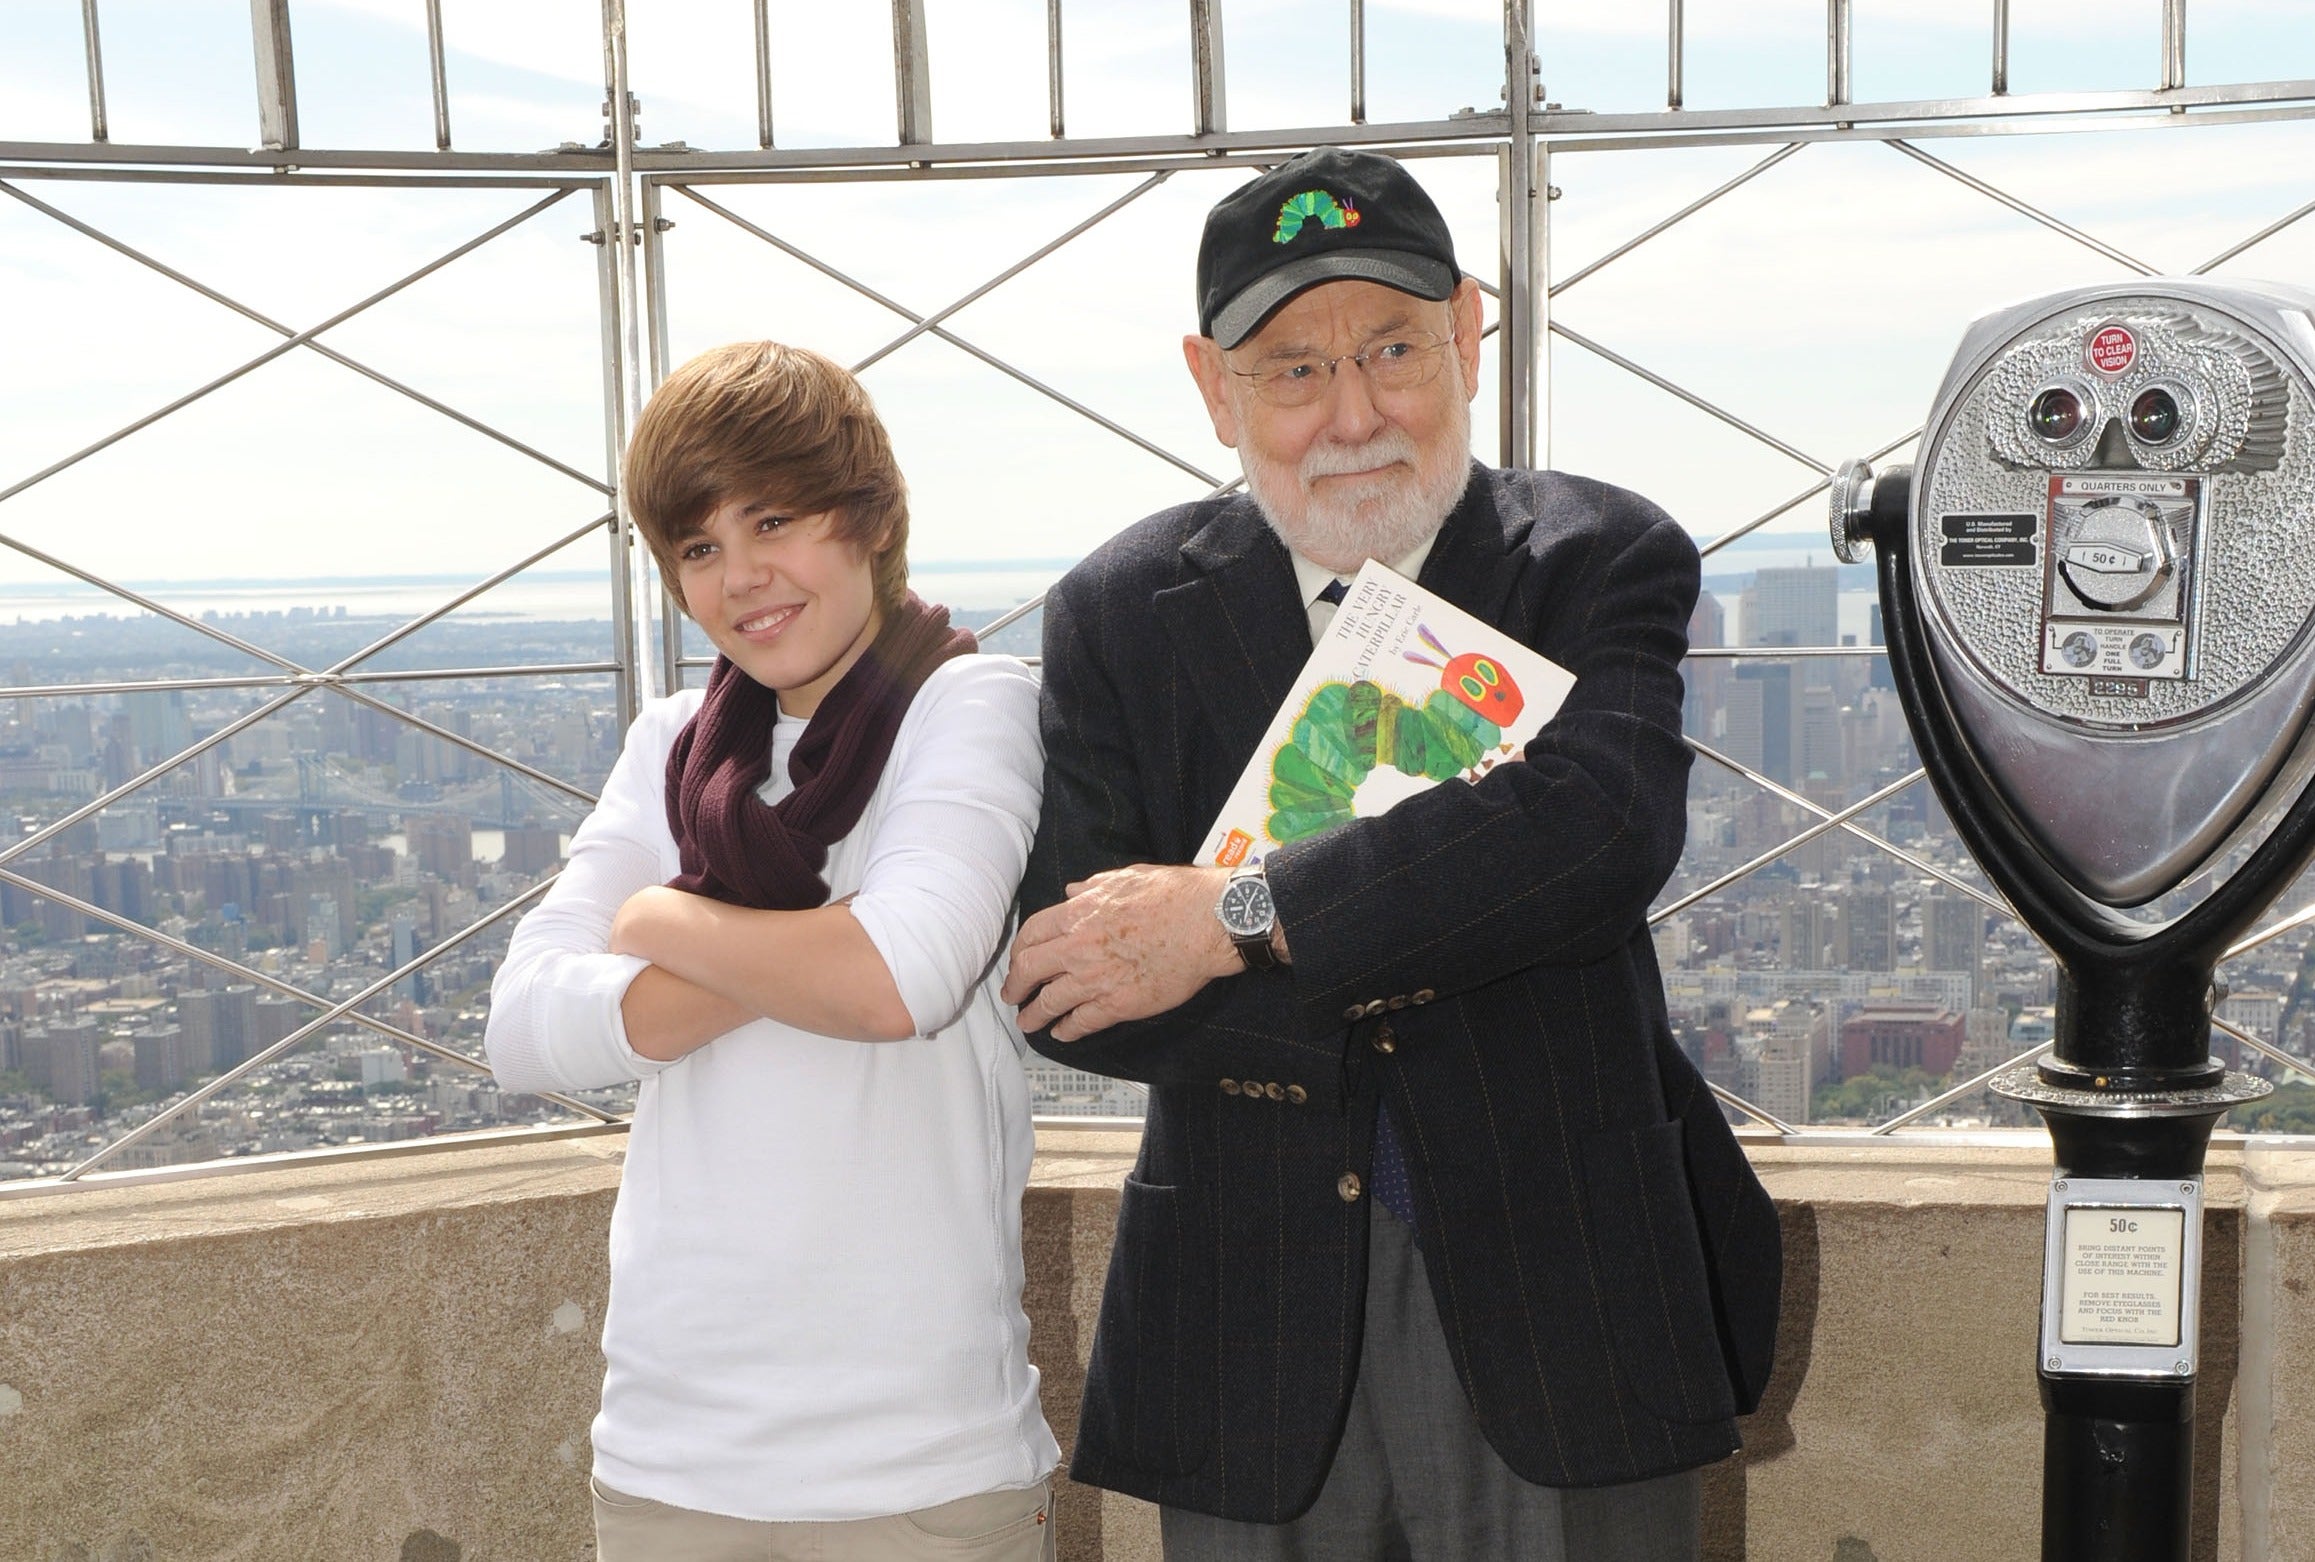 Singer Justin Bieber and author Eric Carle attend the lighting of the Empire State Building to kickoff Jumpstart's Read For The Record Campaign on October 8, 2009 in New York City